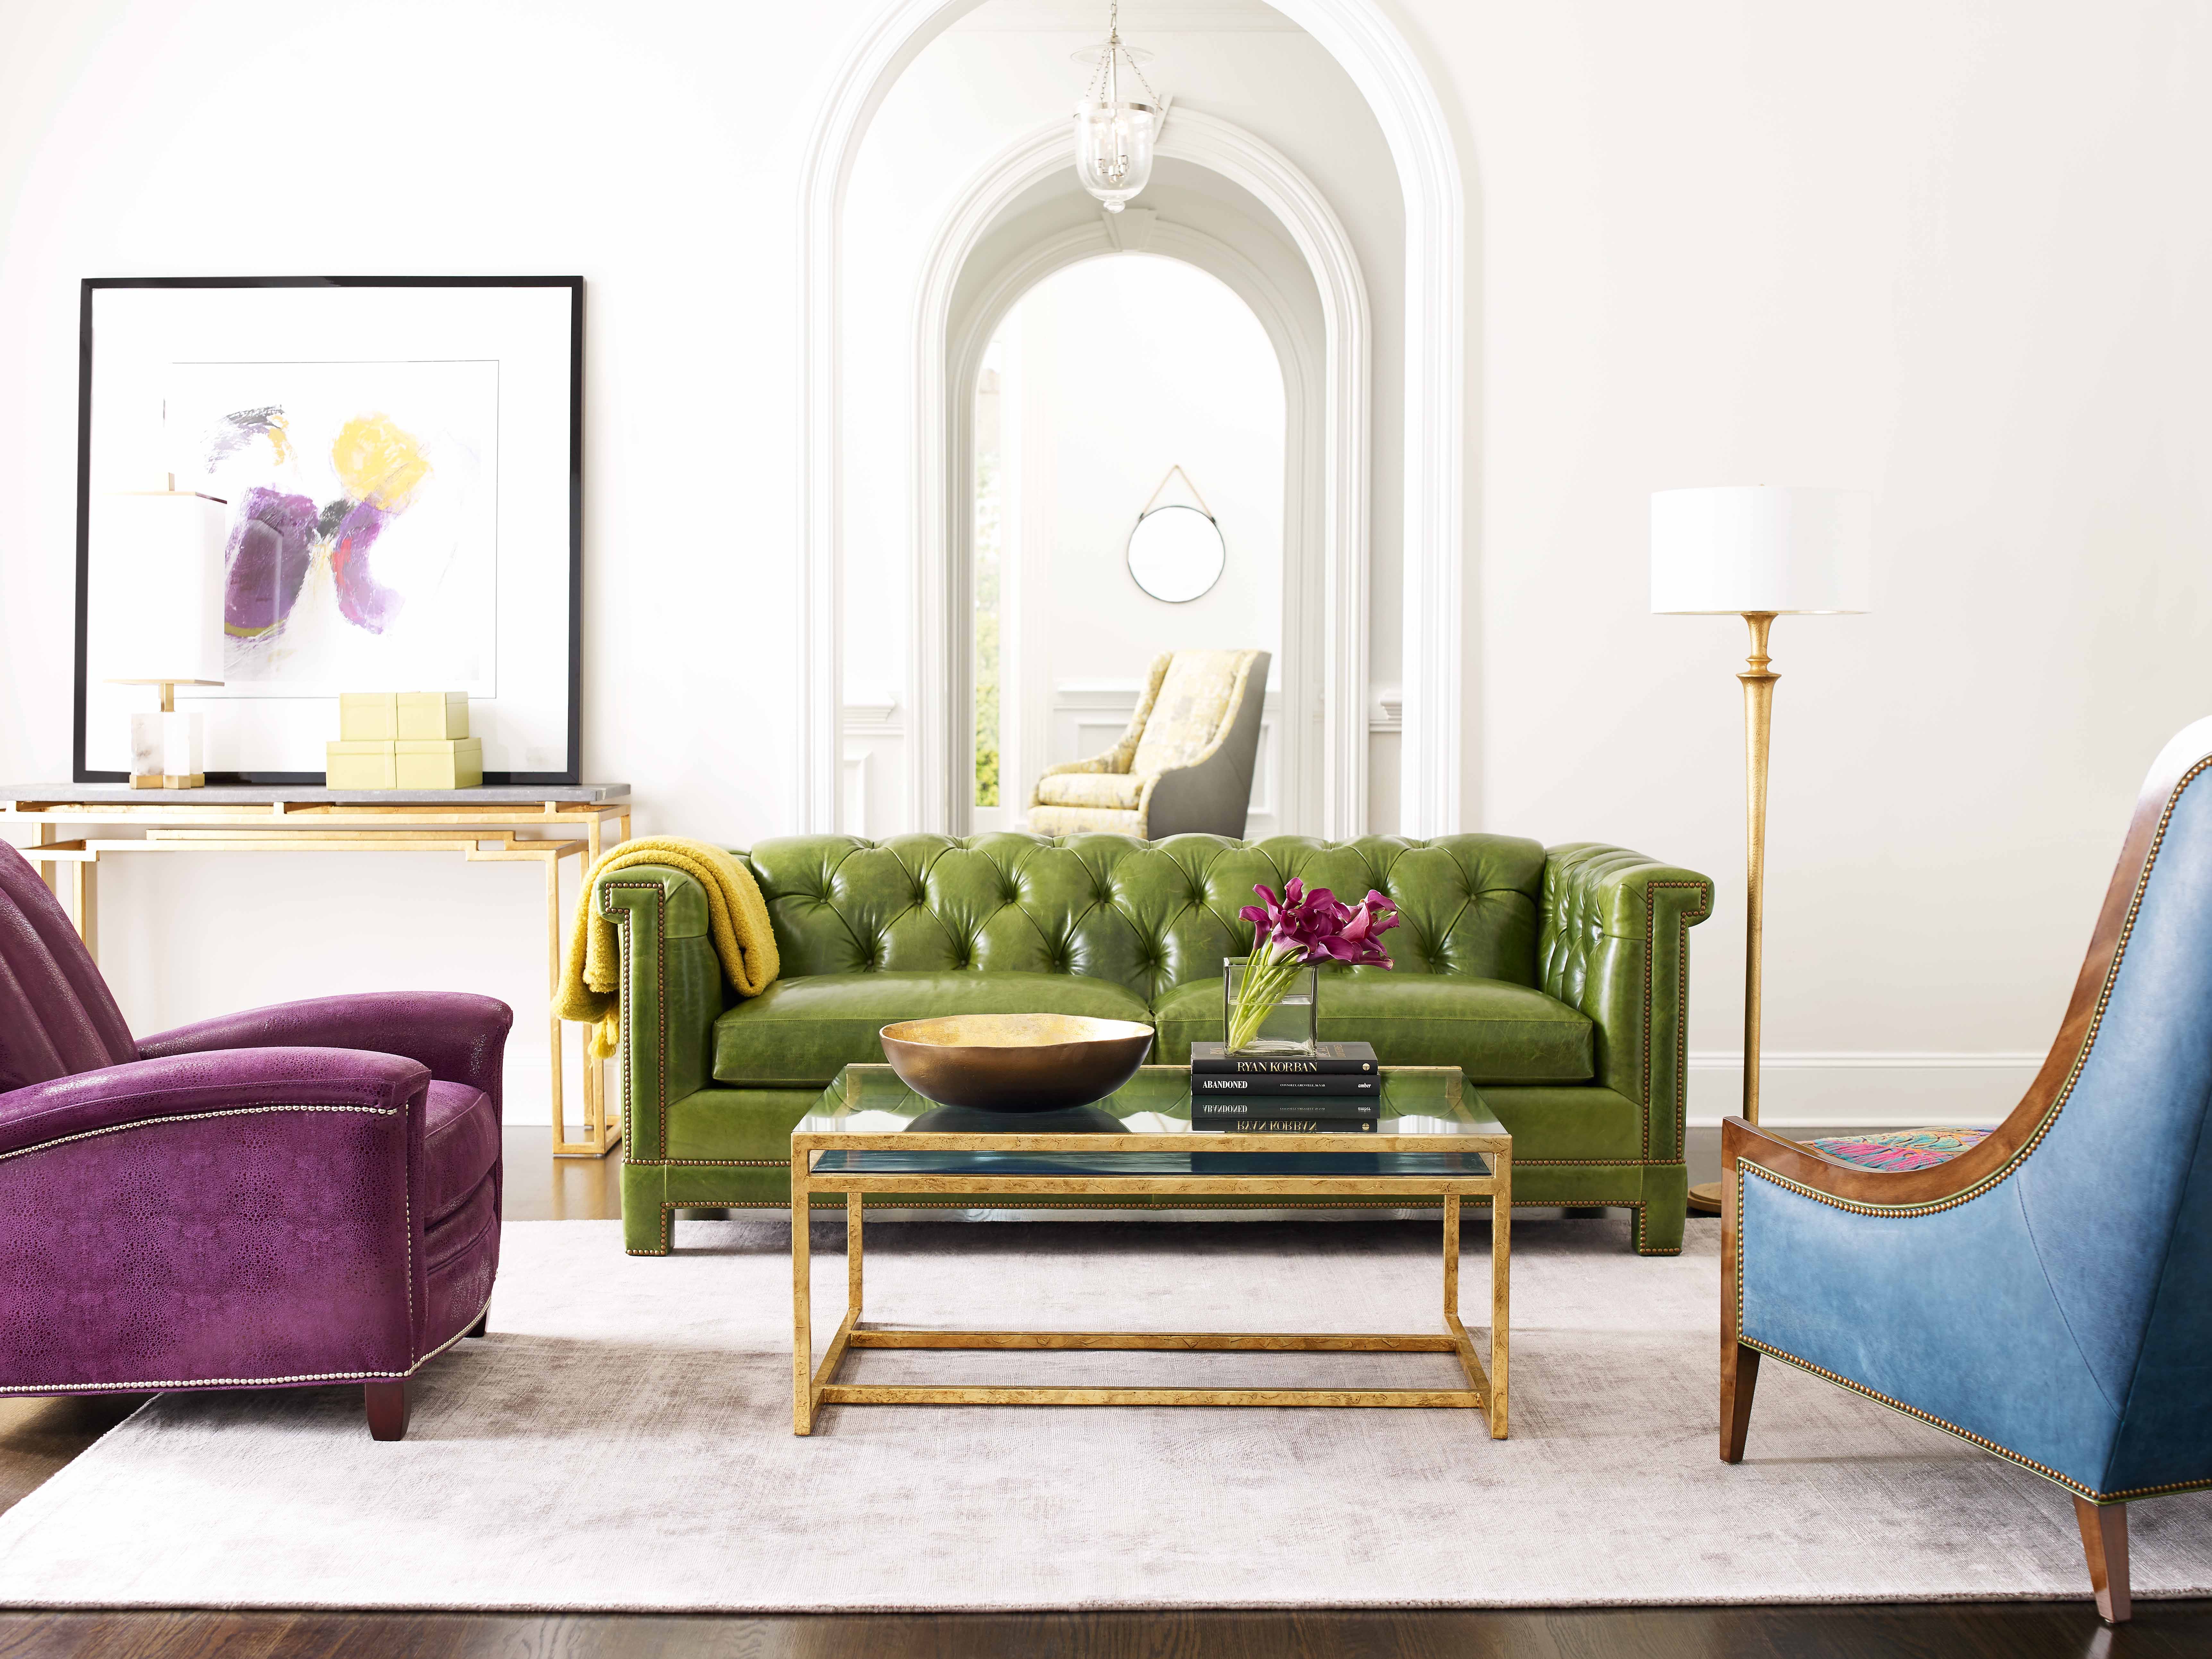 Sofa shown in Tiburon Clover with A nail.  6418-1 Surge Chair in JC Helena Multi & Essence Lagoon with Rainier finish & A nail.  6510-1 Tulip Chair in Tortuga Plum with Java finish & J nails.